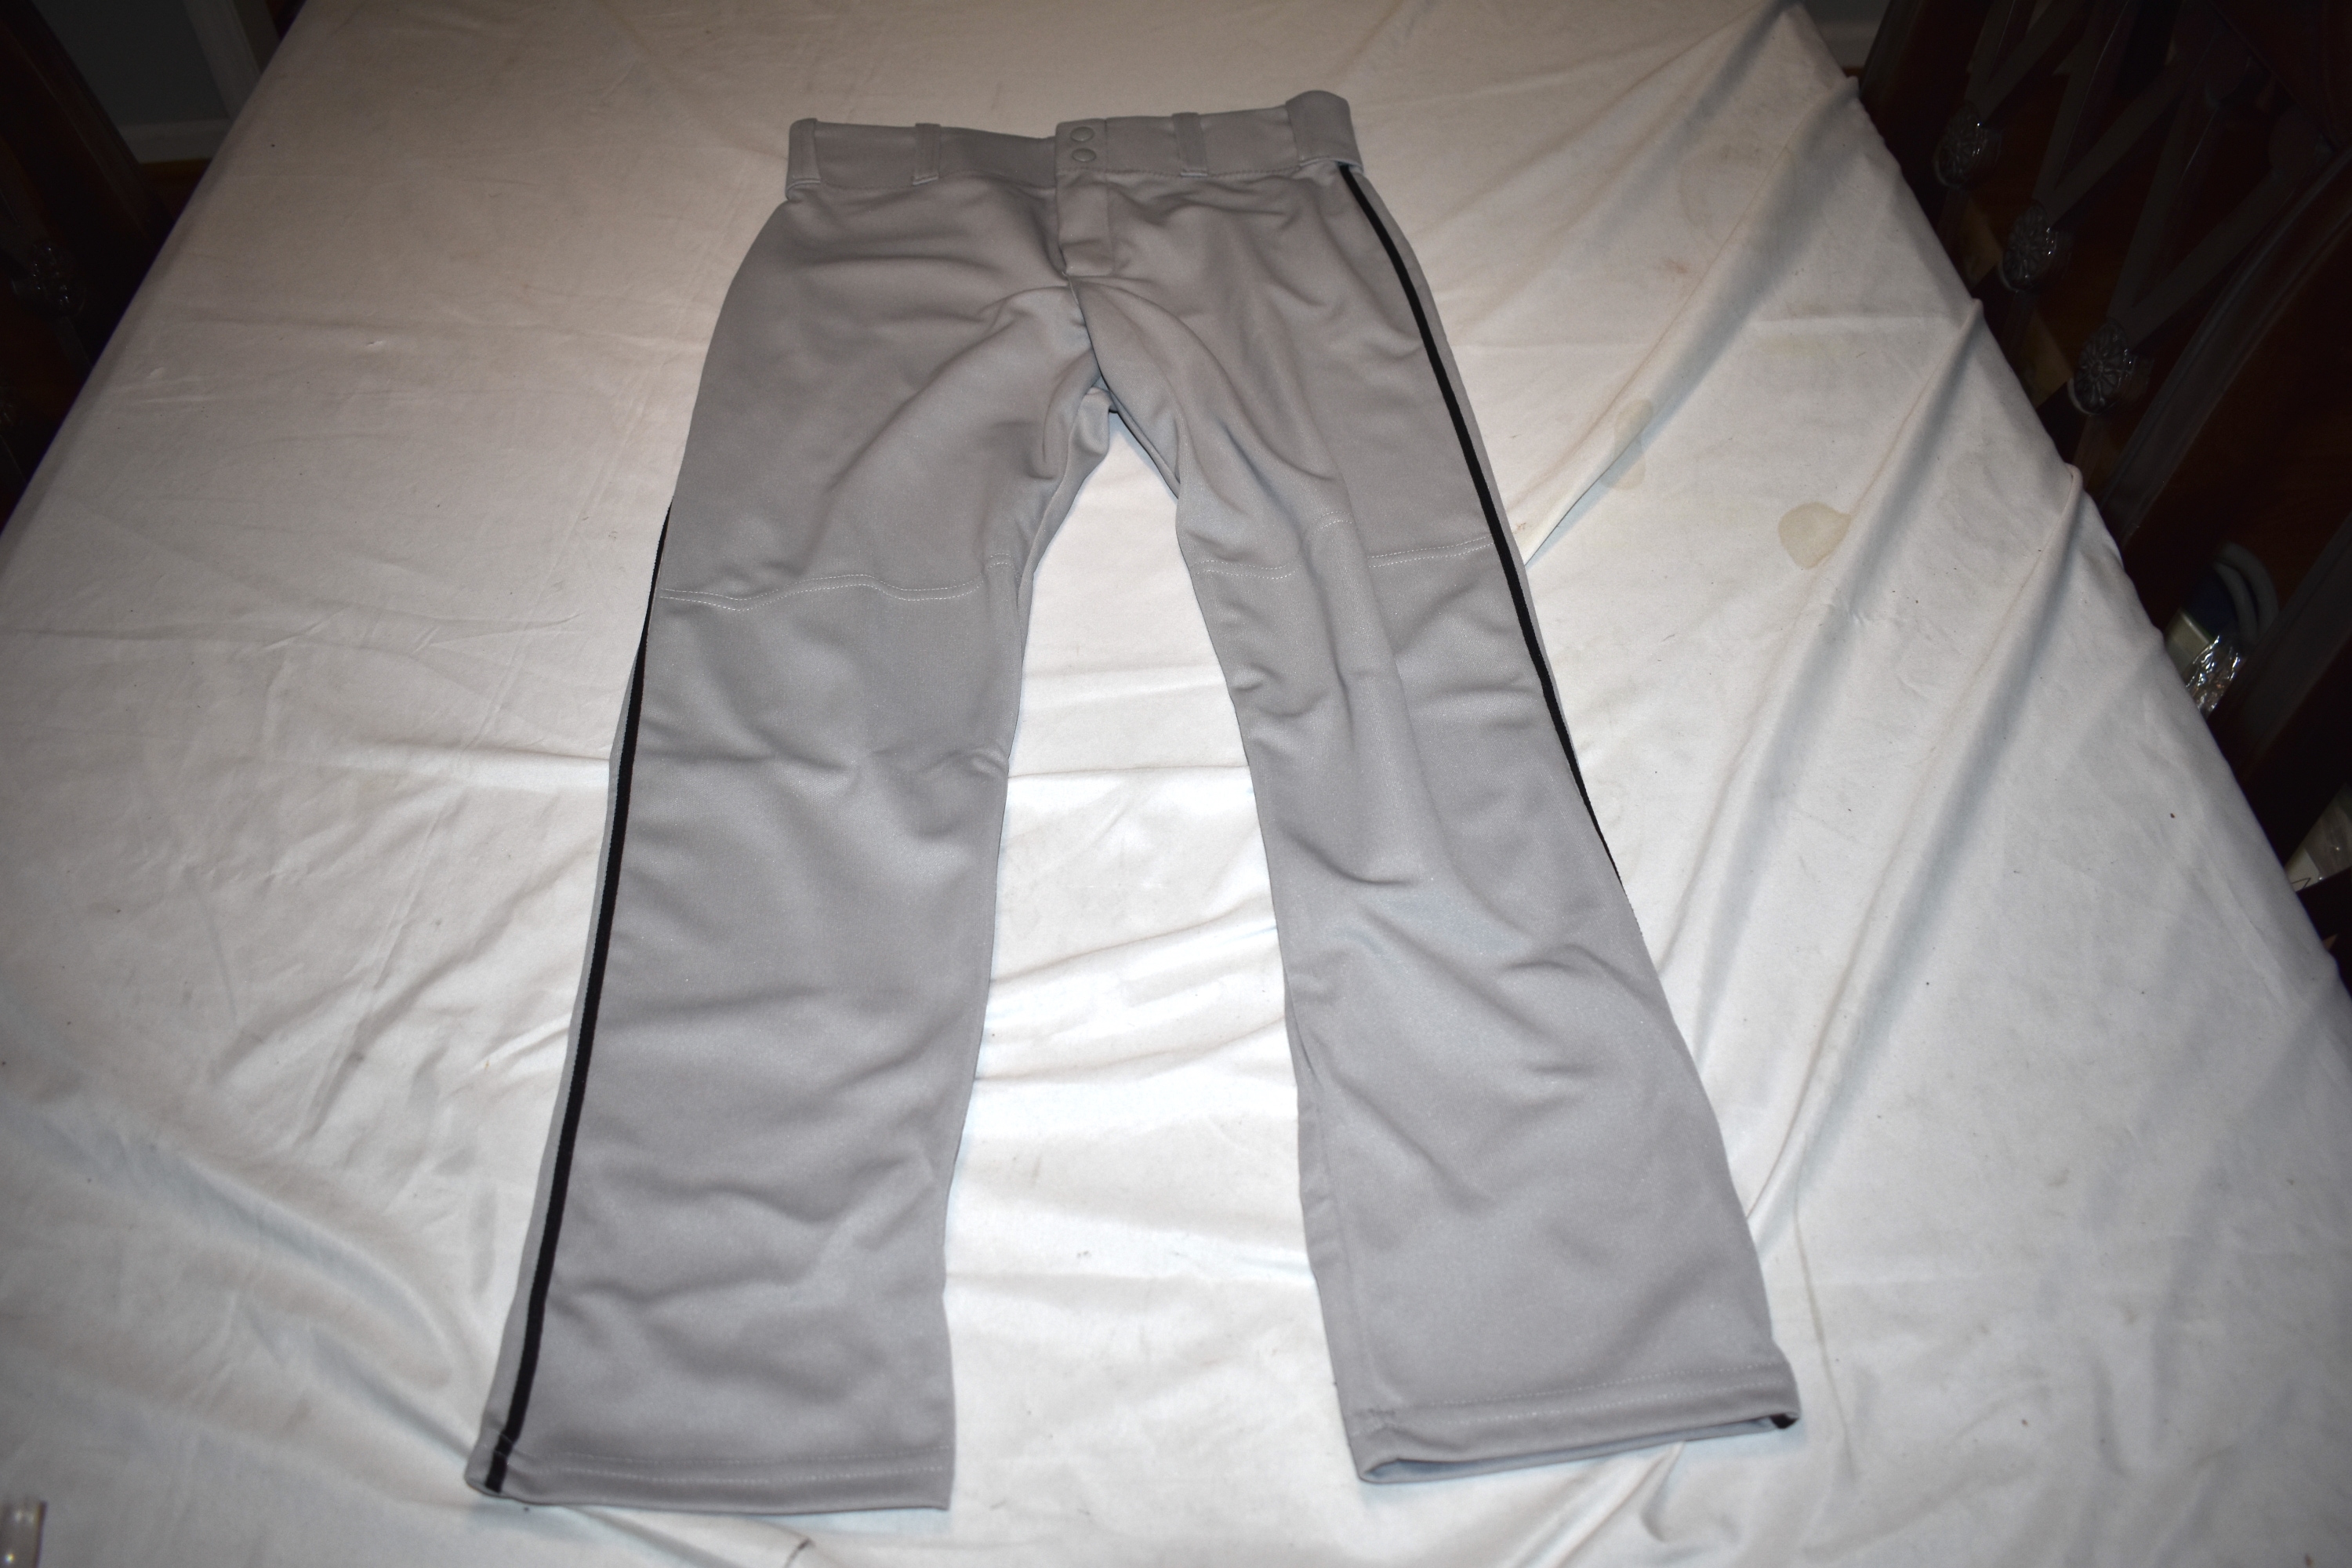 NEW - Alleson Athletics Piped Baseball Pants, Gray/Black, Youth Large